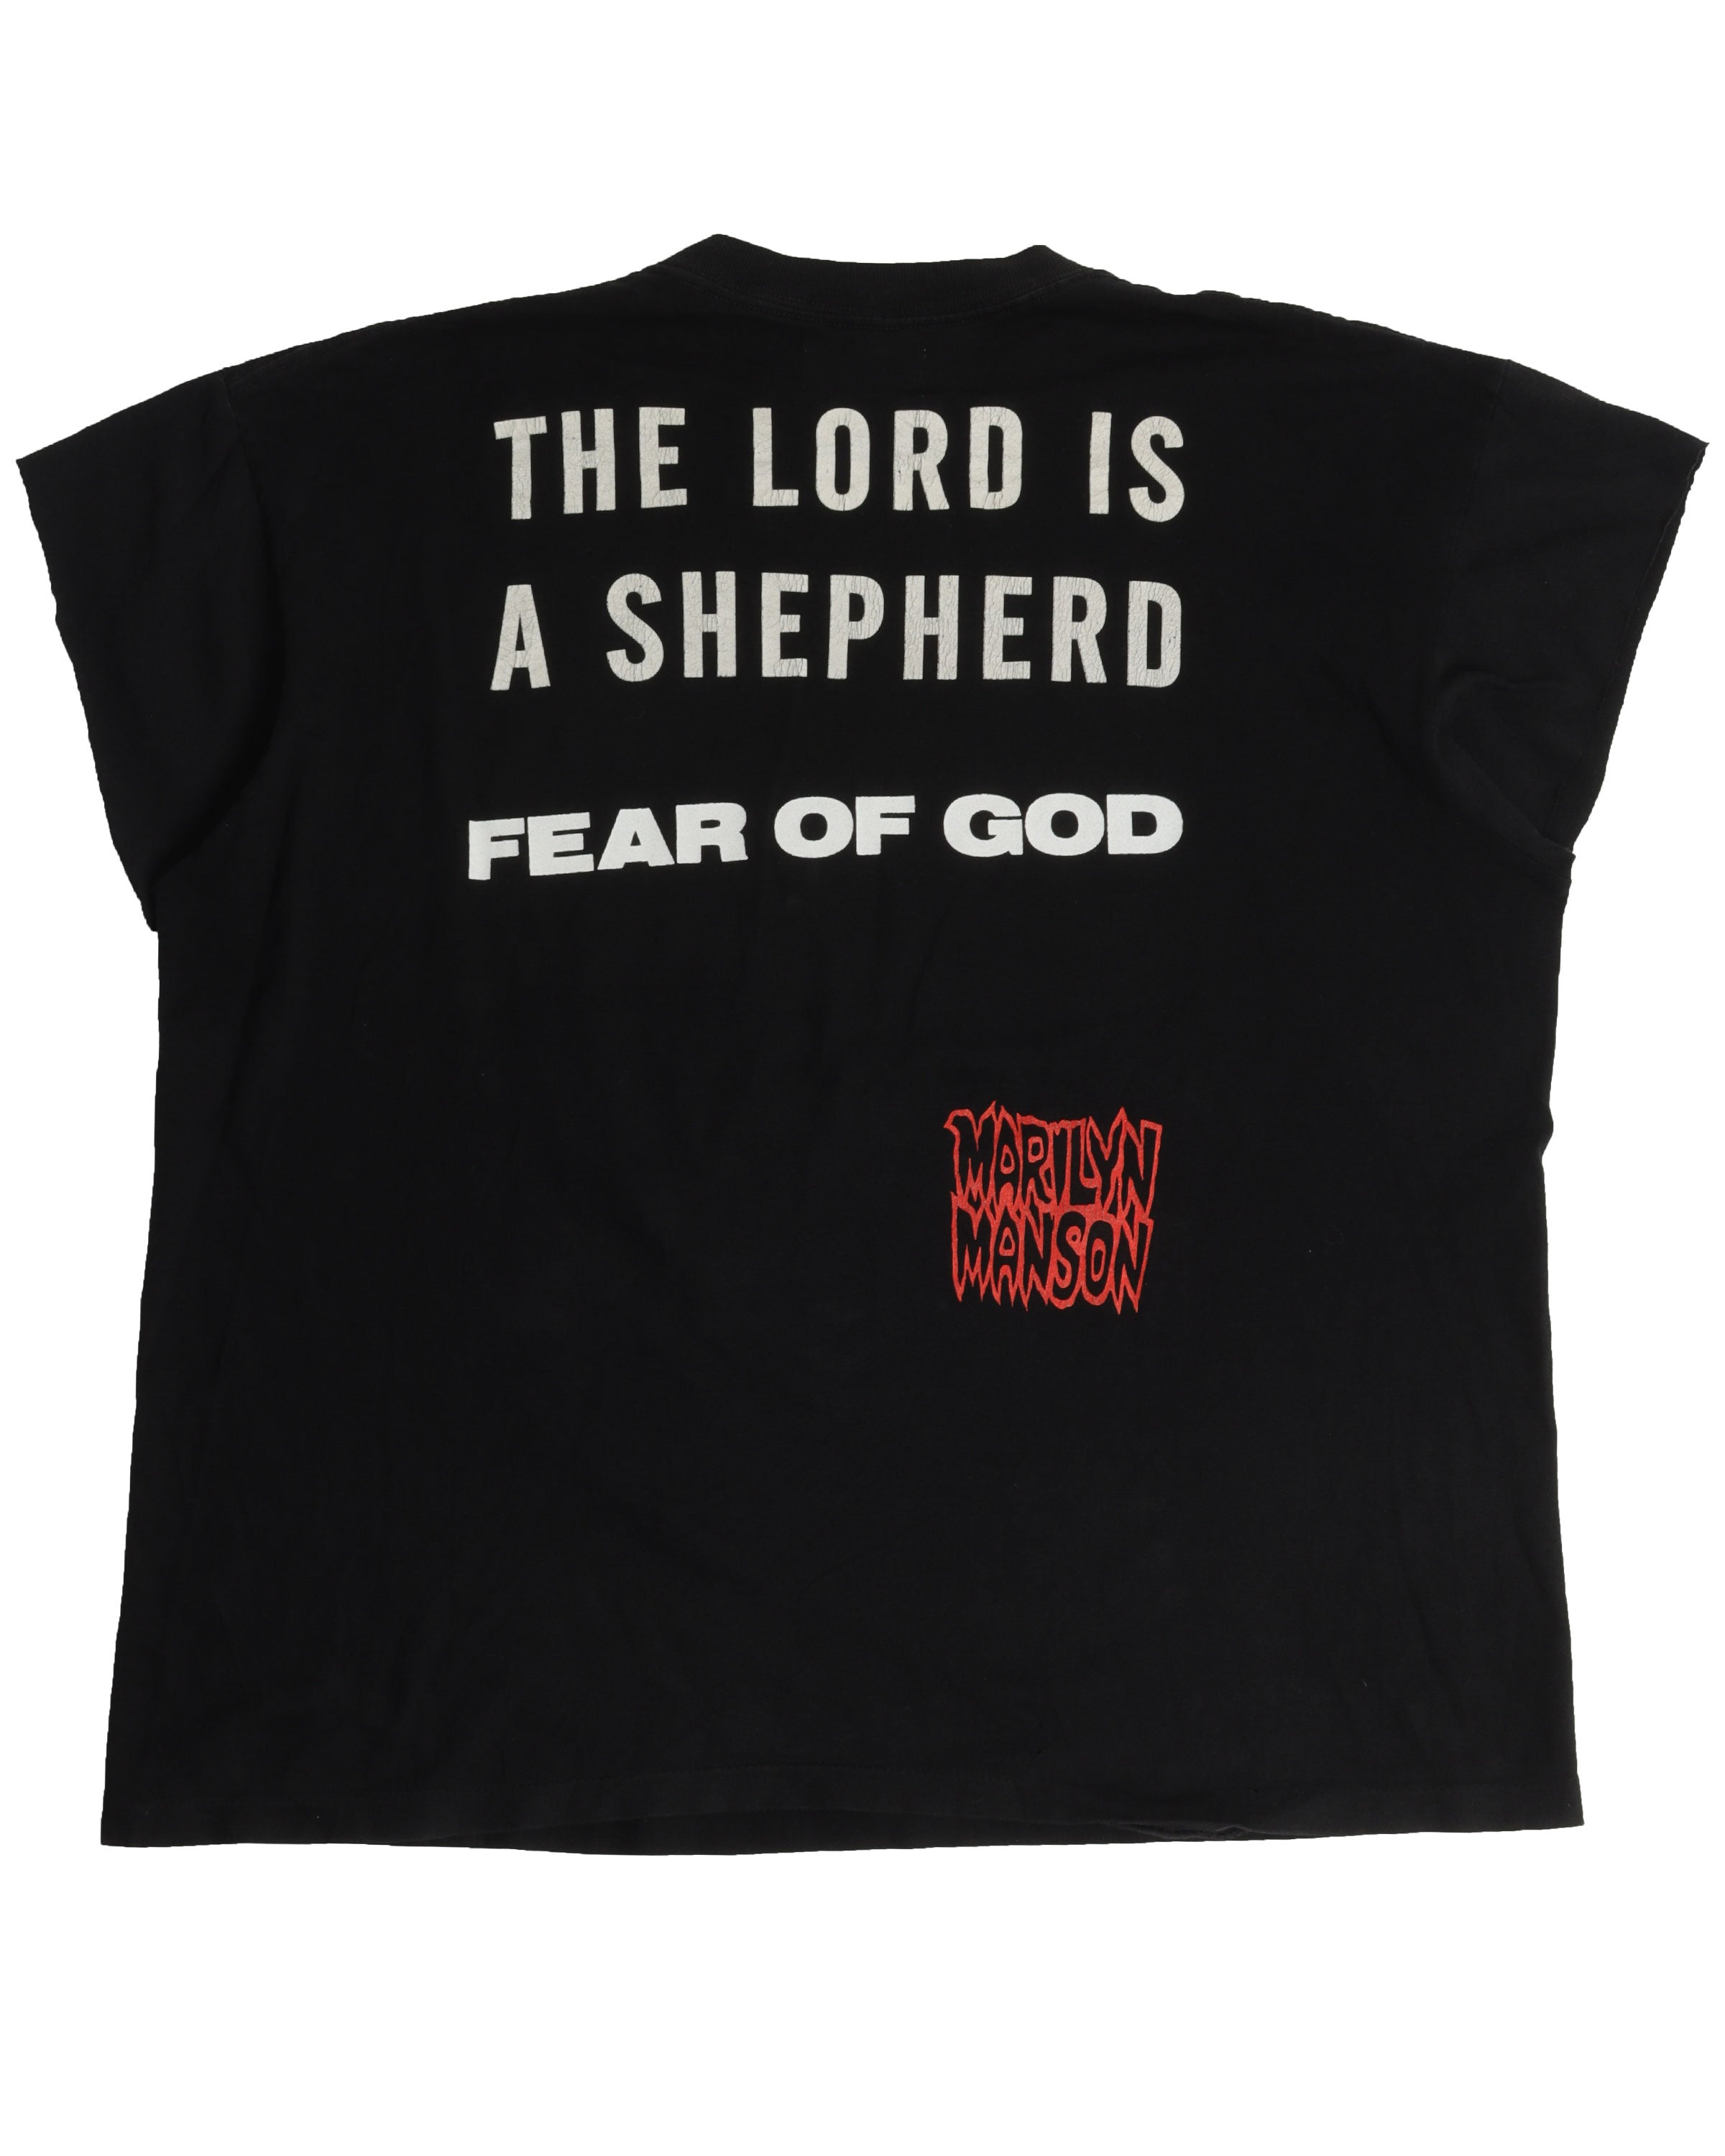 3rd Collection Beware Of The God T-Shirt